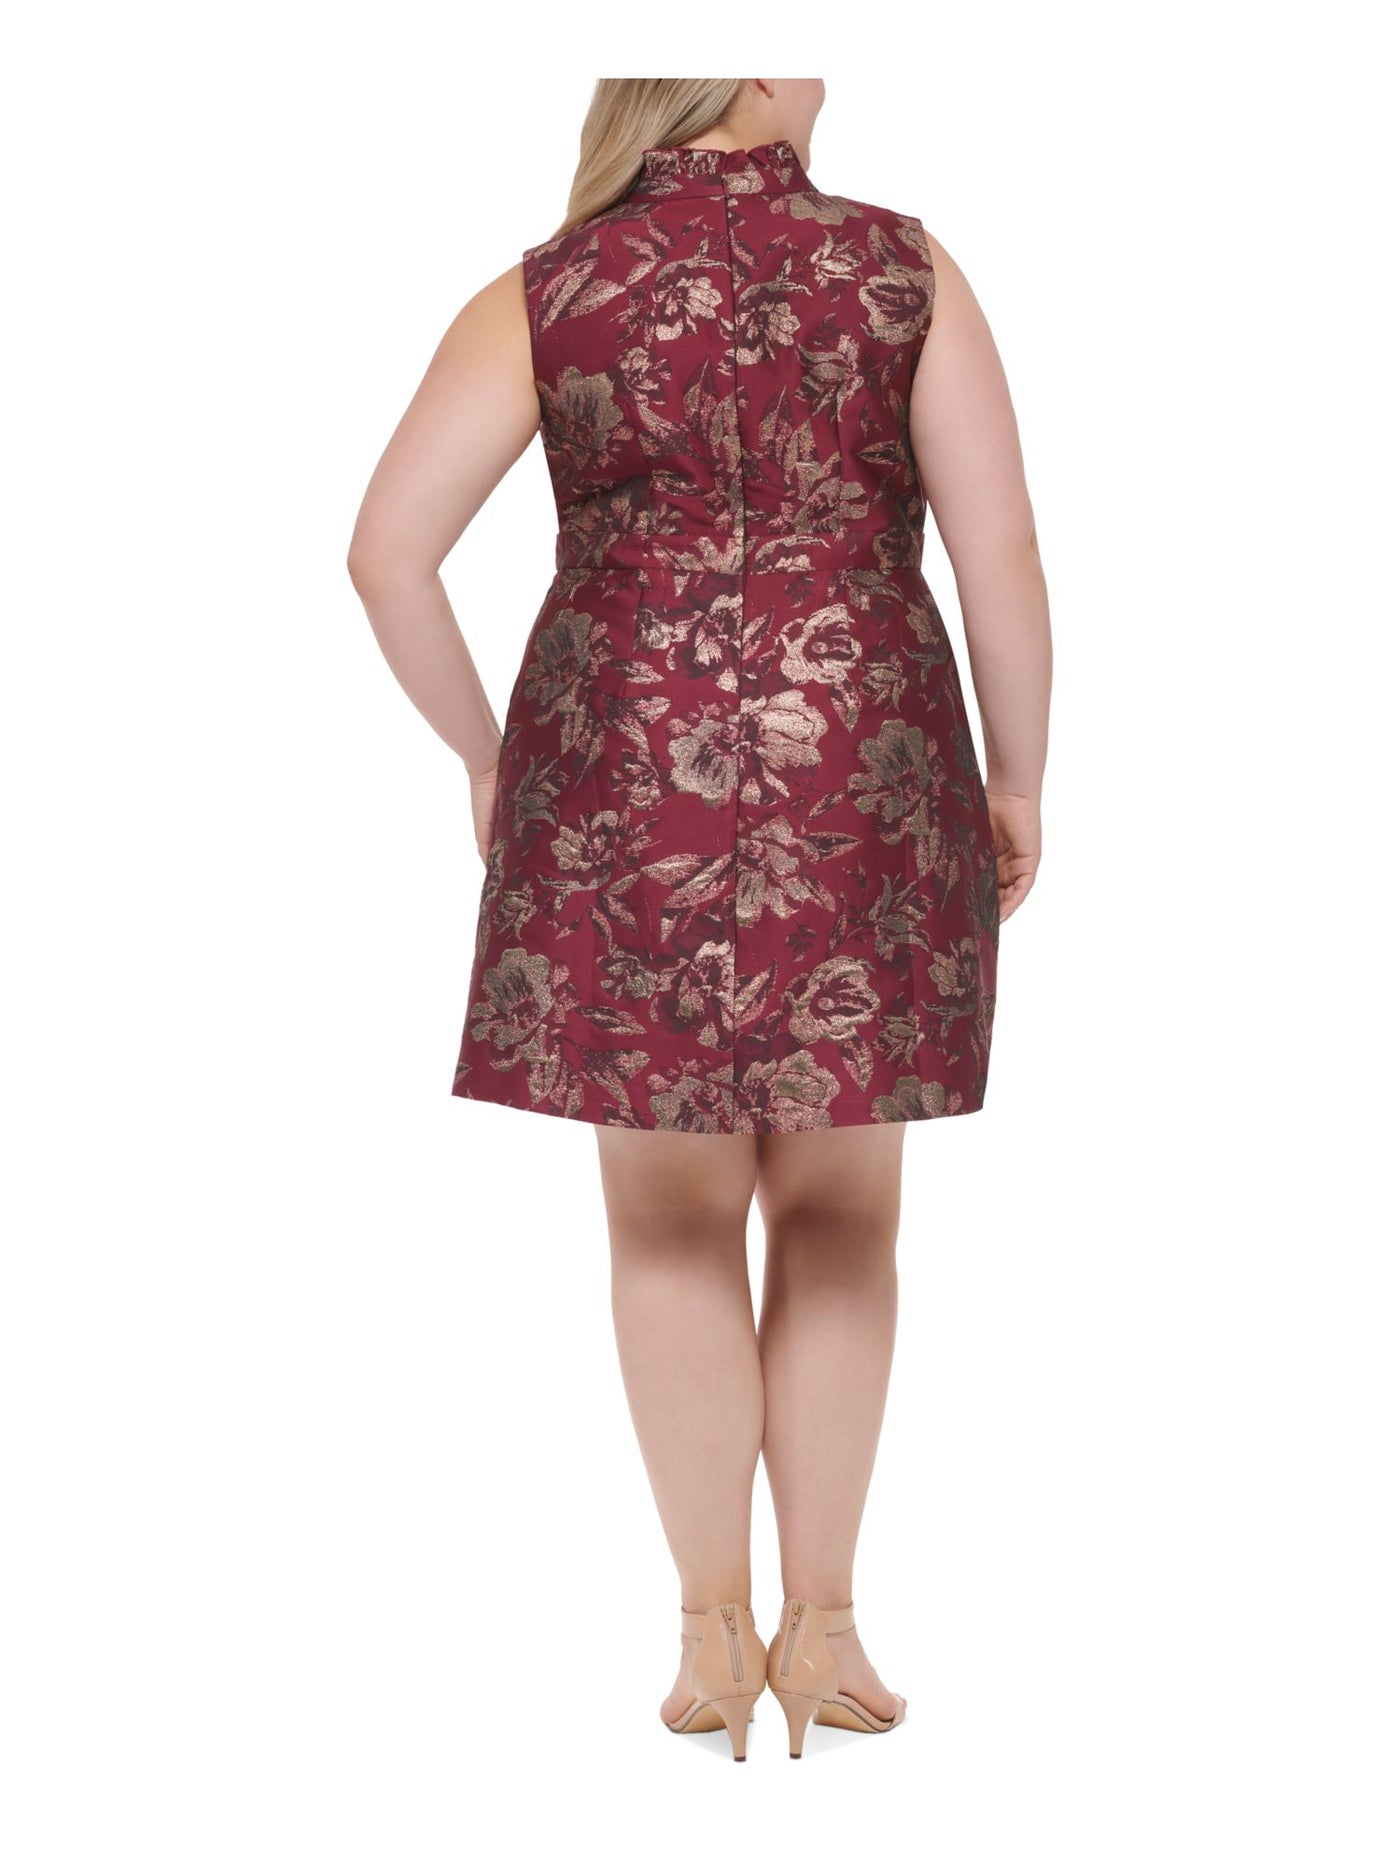 VINCE CAMUTO Womens Burgundy Zippered Pocketed Ruffled Pleated Lined Floral Sleeveless Split Above The Knee Fit + Flare Dress Plus 14W